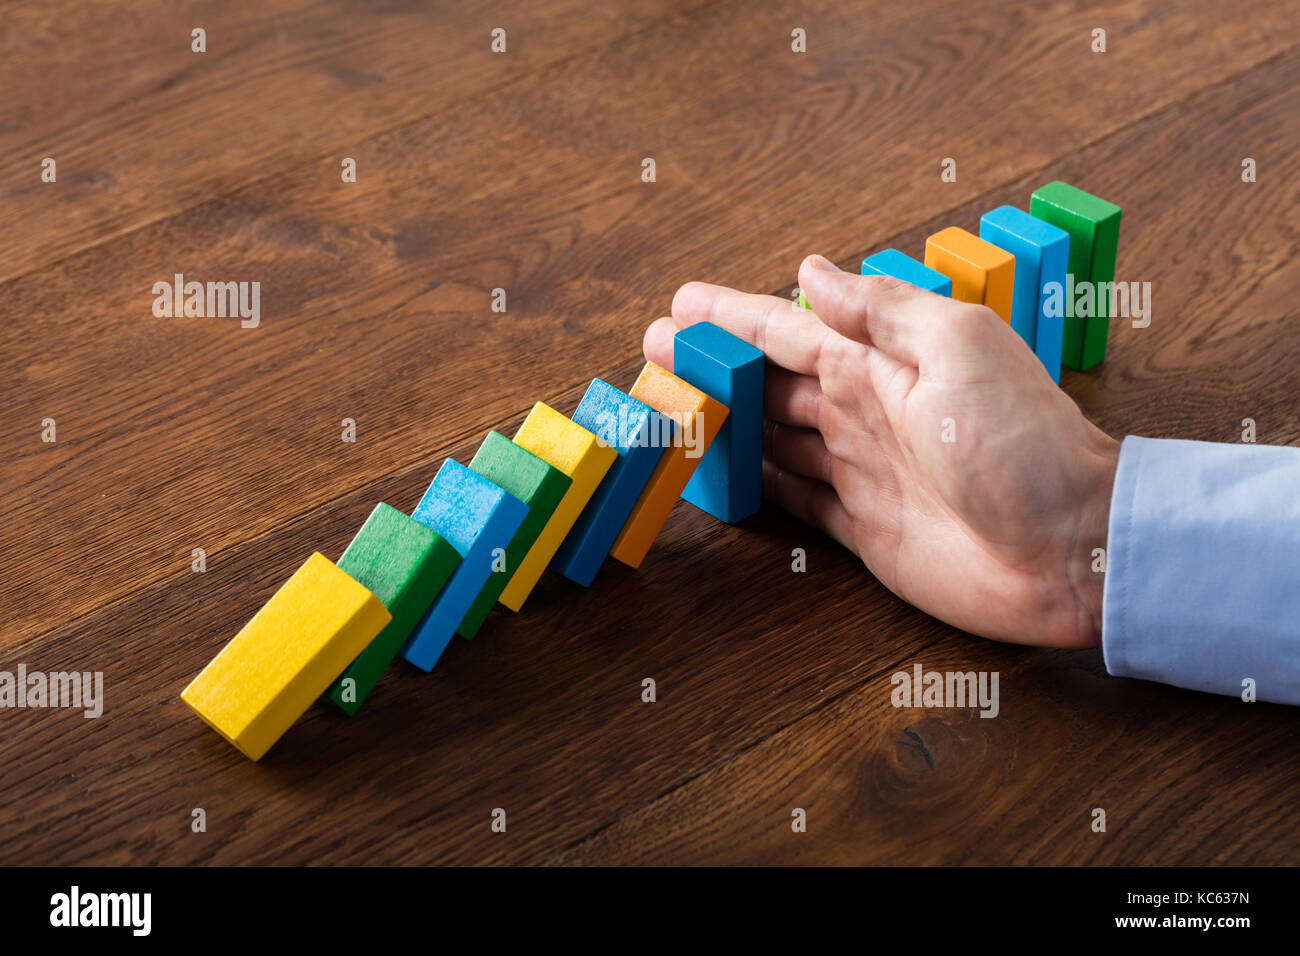 Person Hand Stopping Falling Dominoes From Continuous Toppled On Wooden Desk. Business Risk Concept Stock Photo